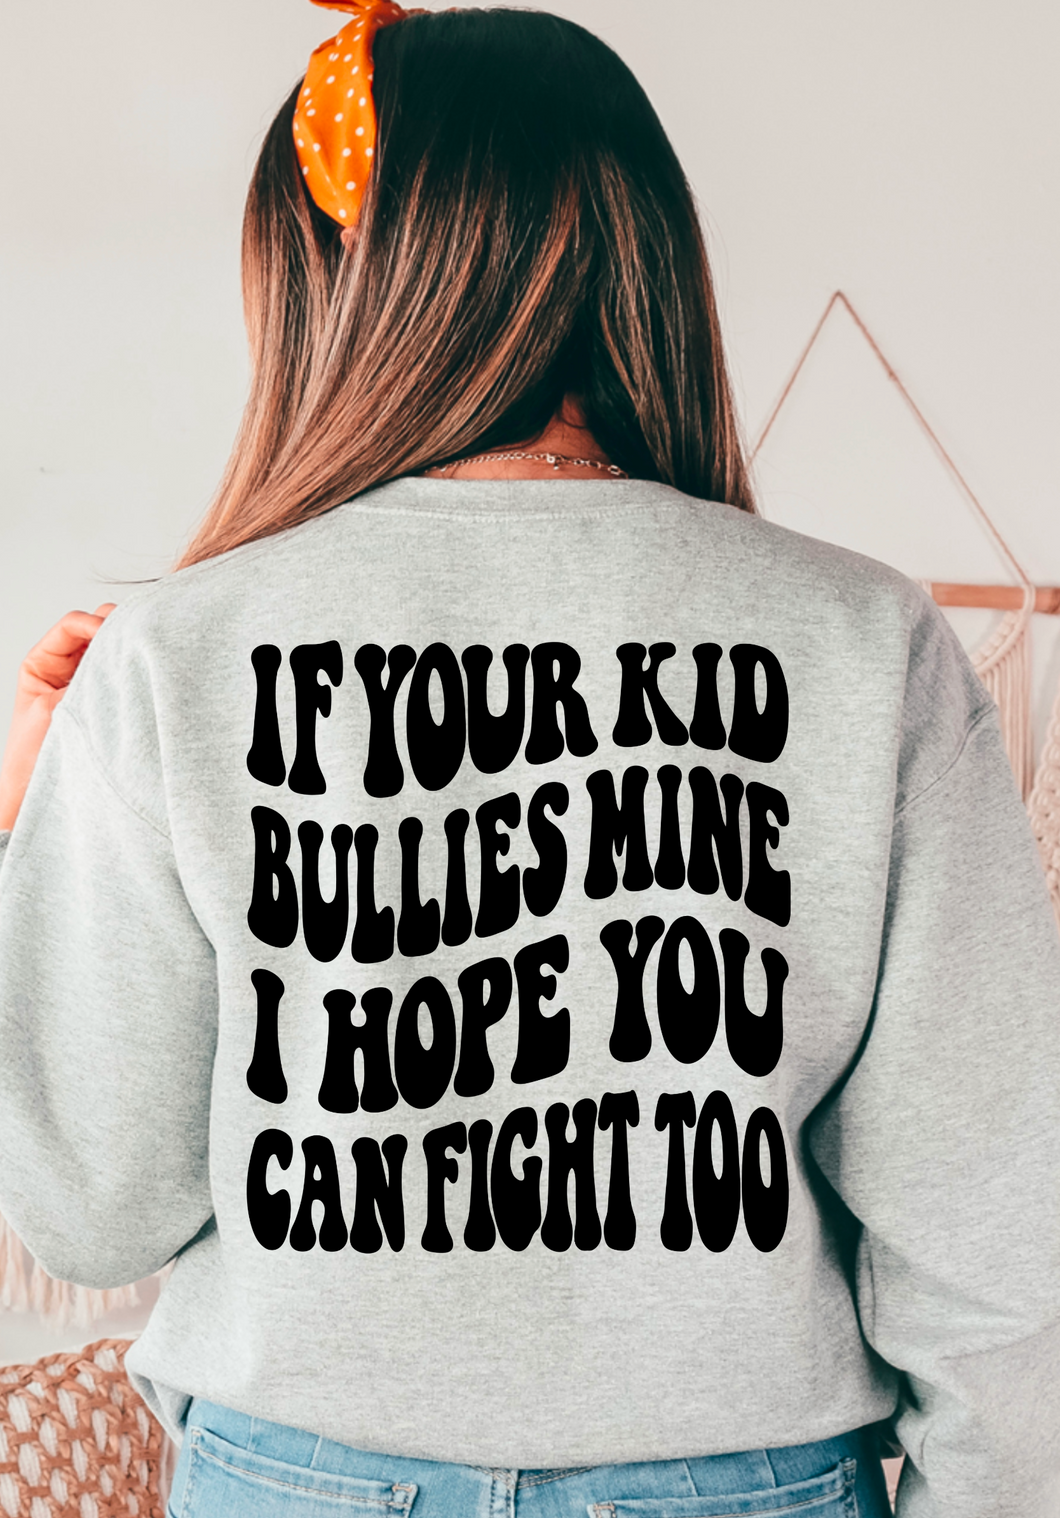 If your kid bullies mine I hope you can fight too